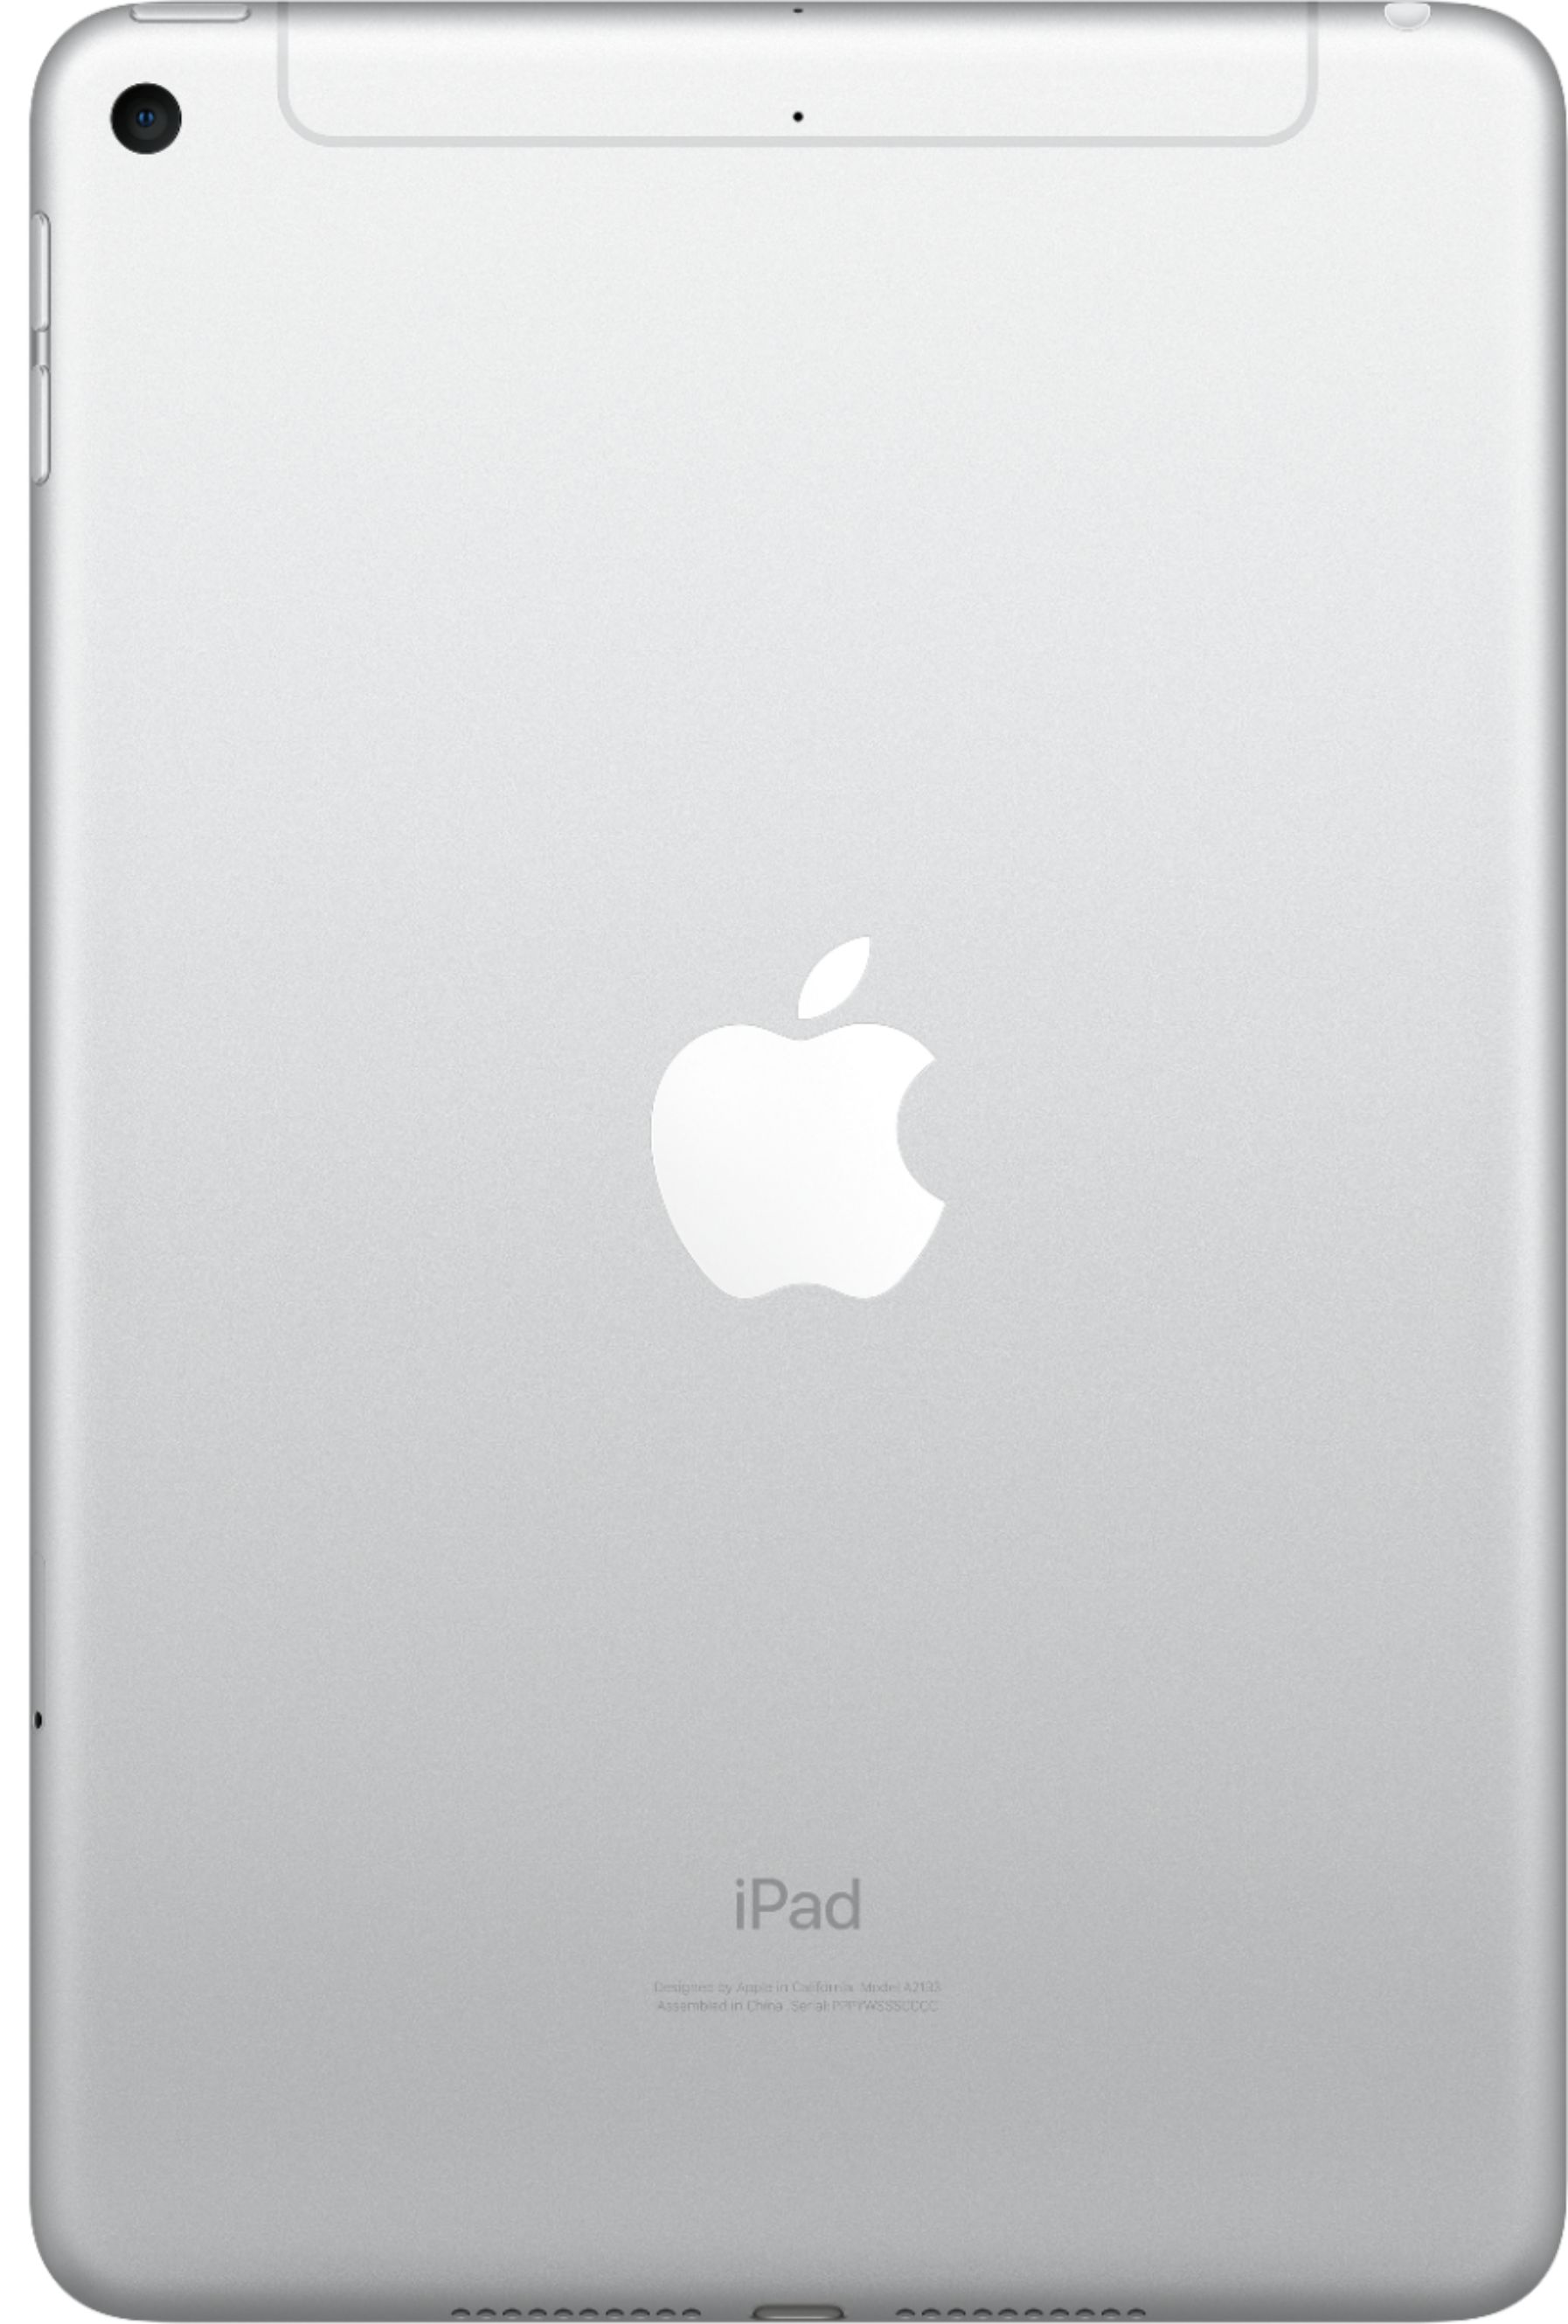 Back View: Apple - 10.2-Inch iPad (9th Generation) with Wi-Fi - 256GB - Silver